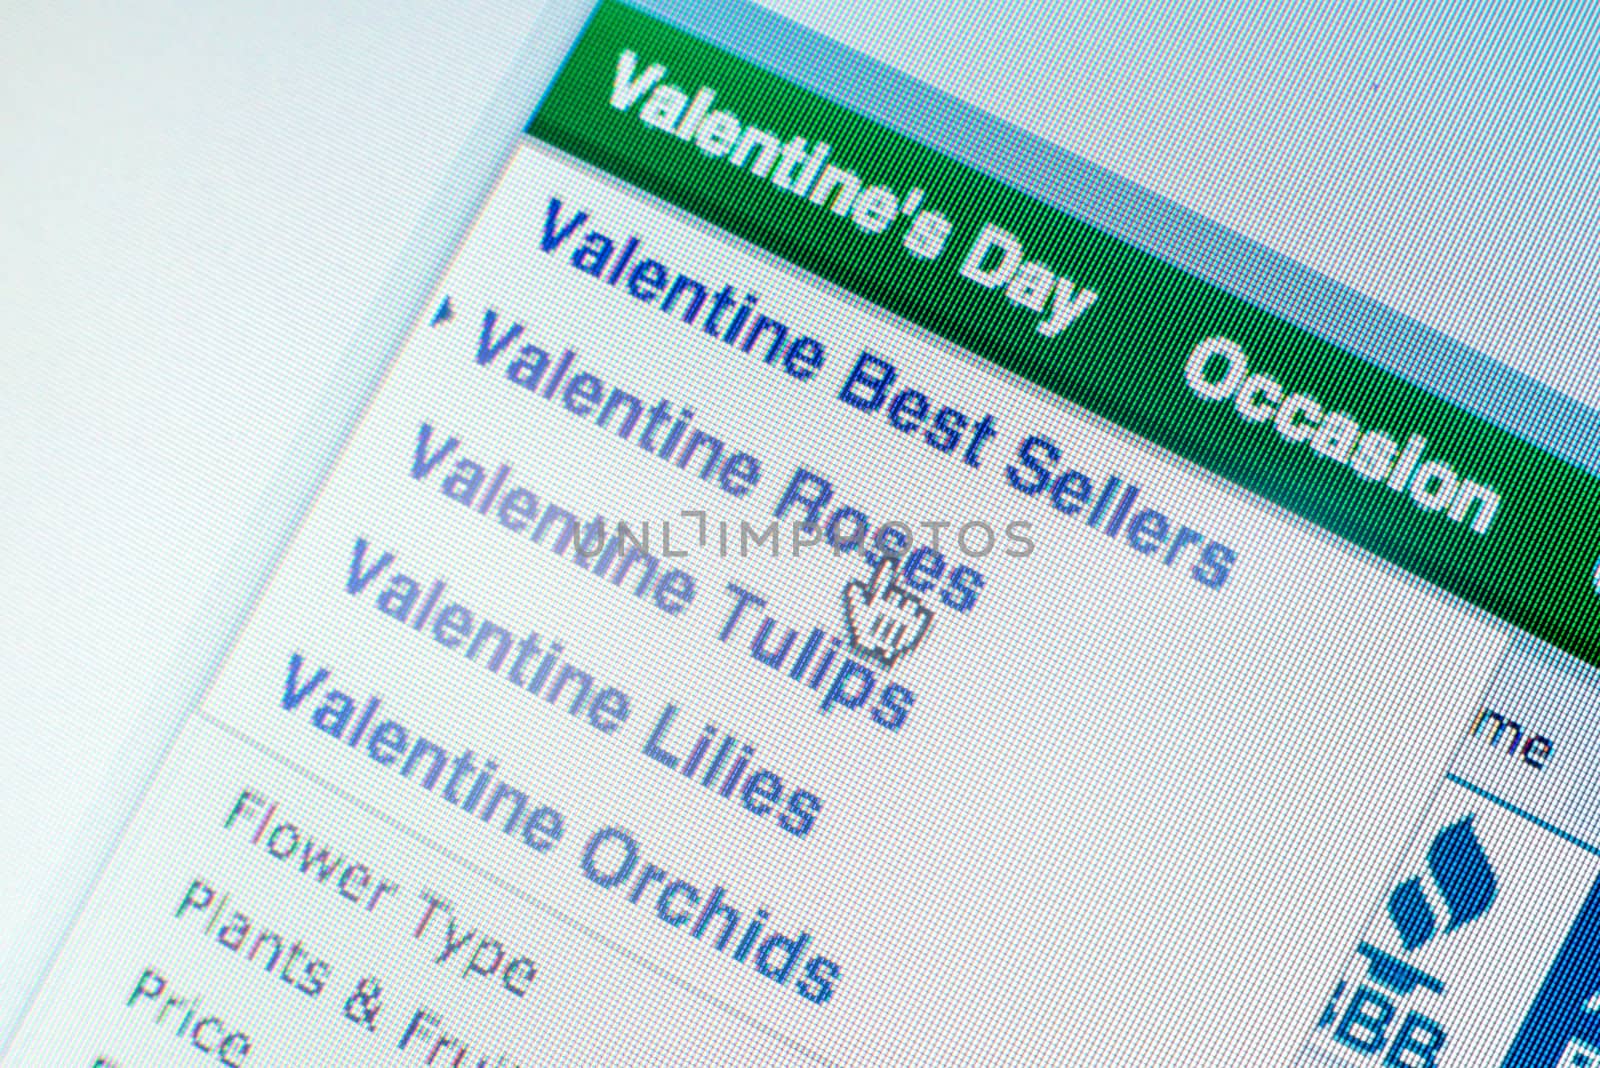 Mouse clicking "Valentines roses" link on website by iamway